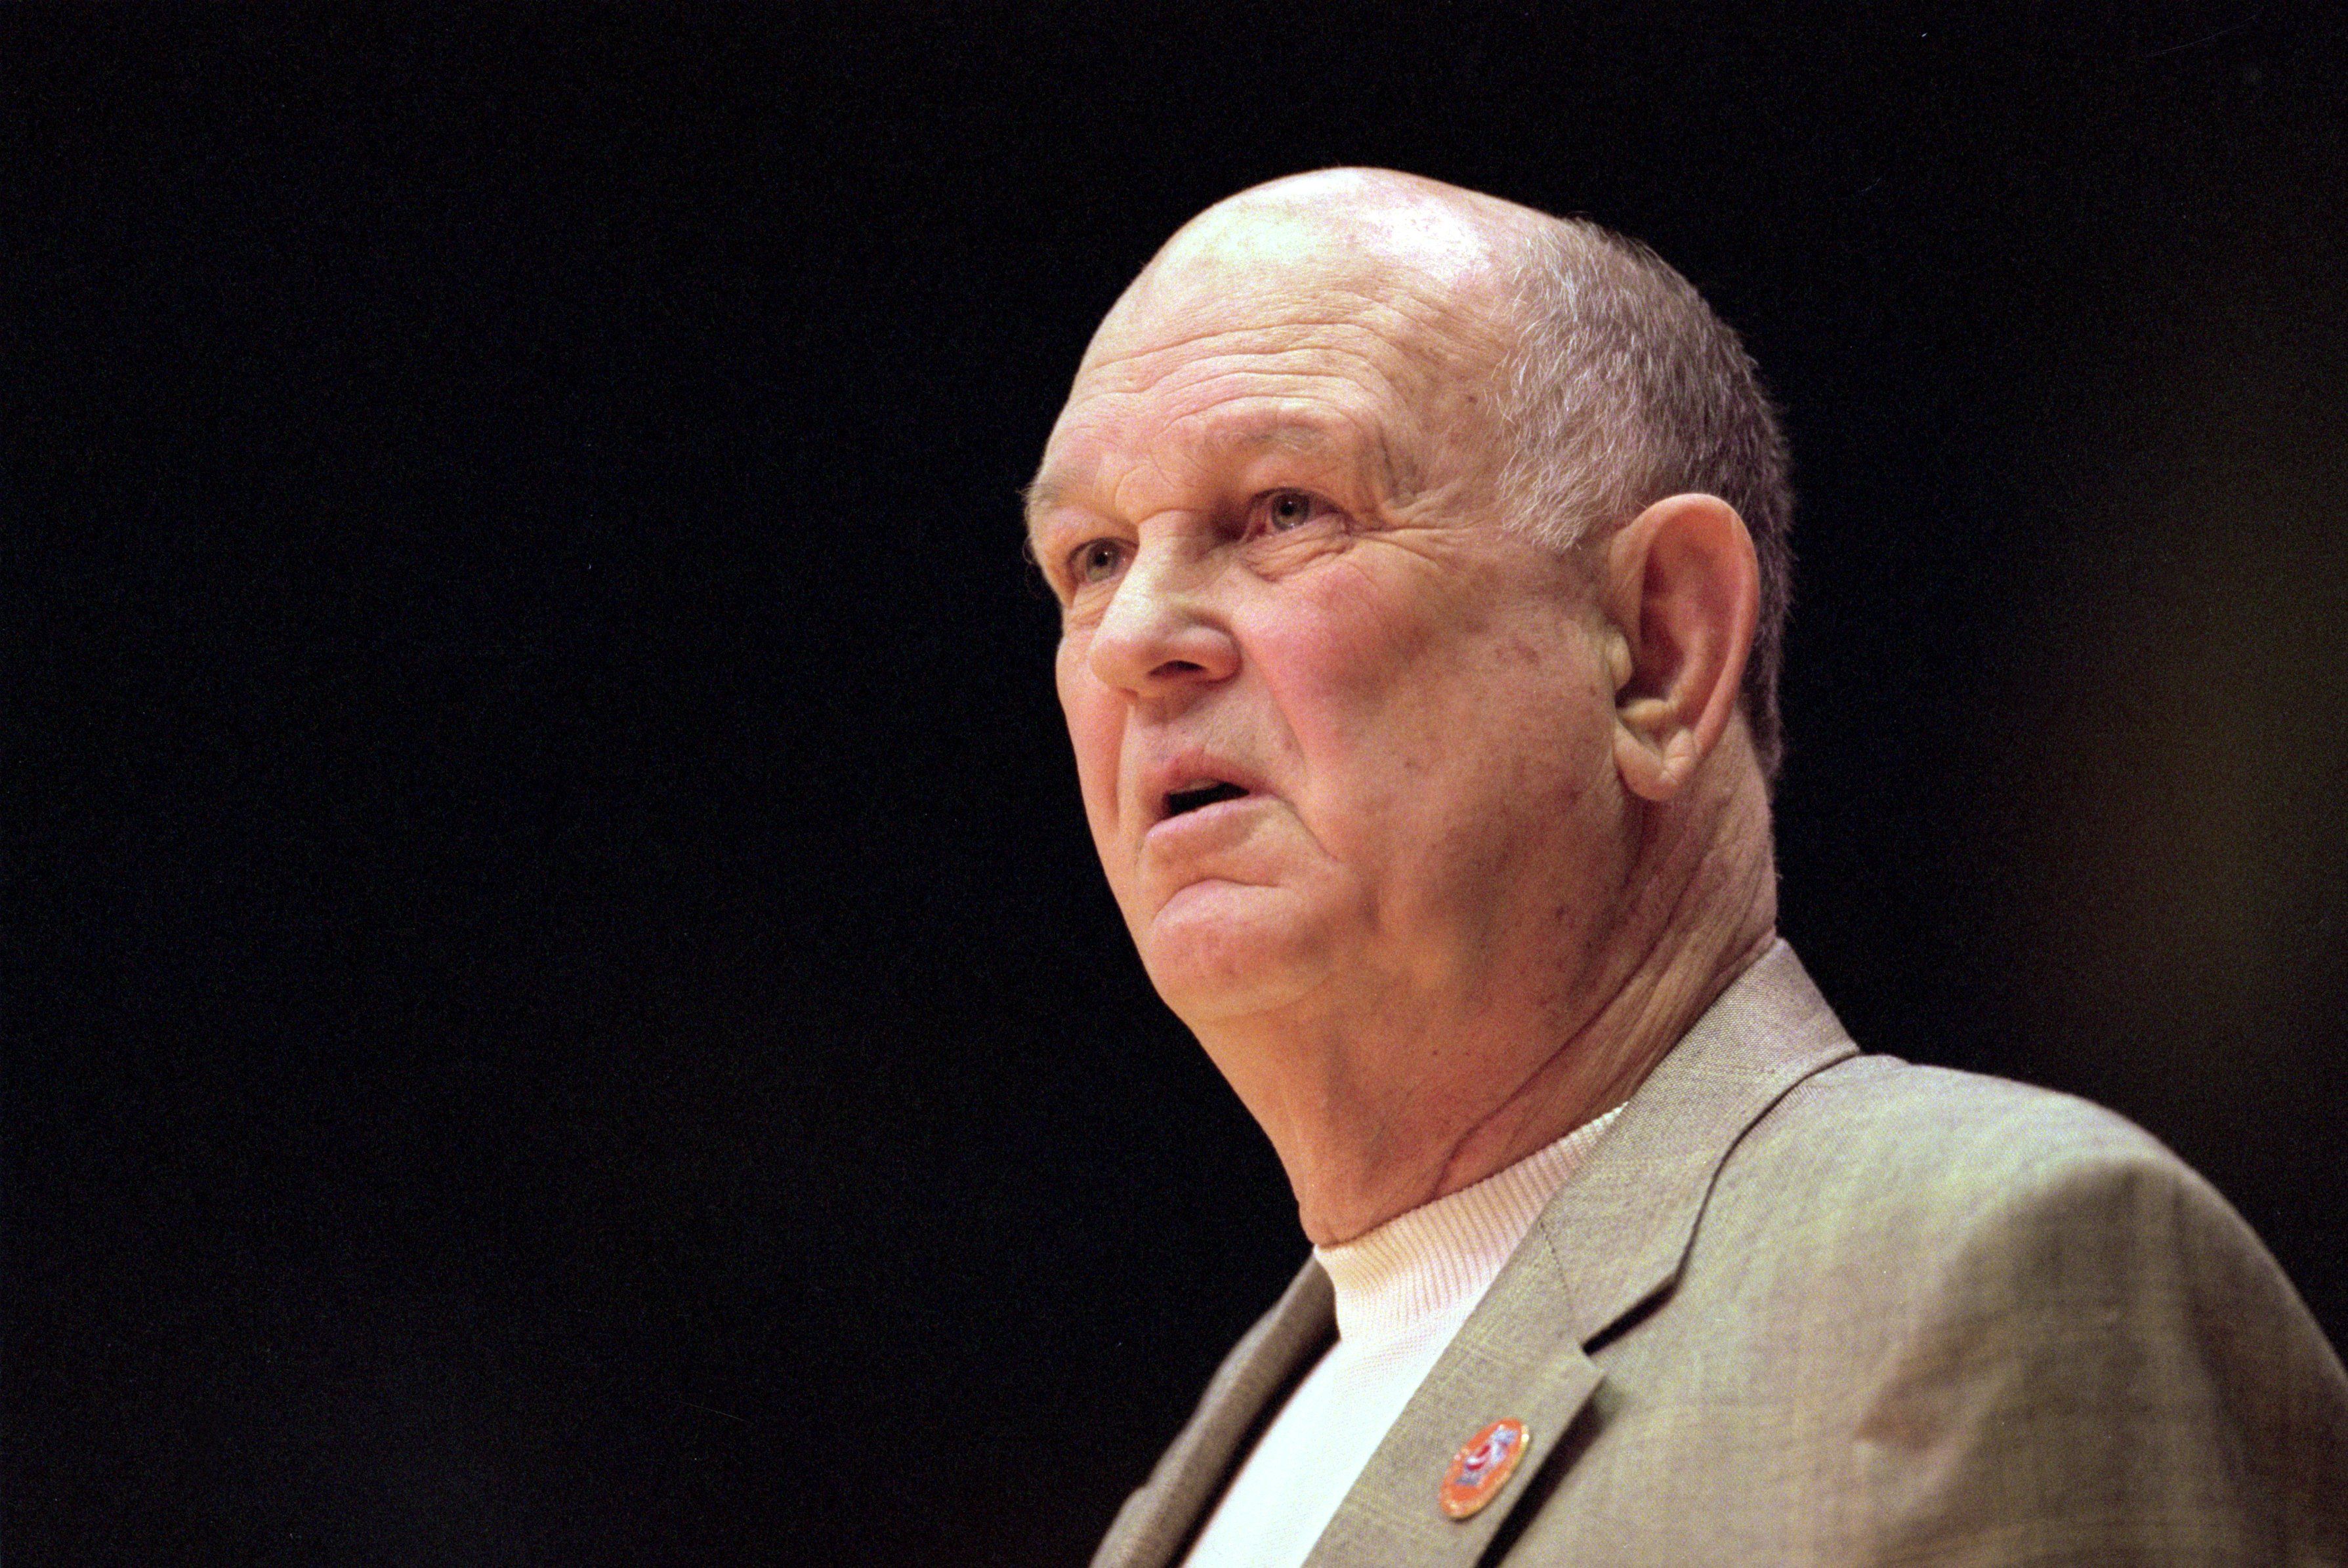 Lefty Driesell looks on critically.